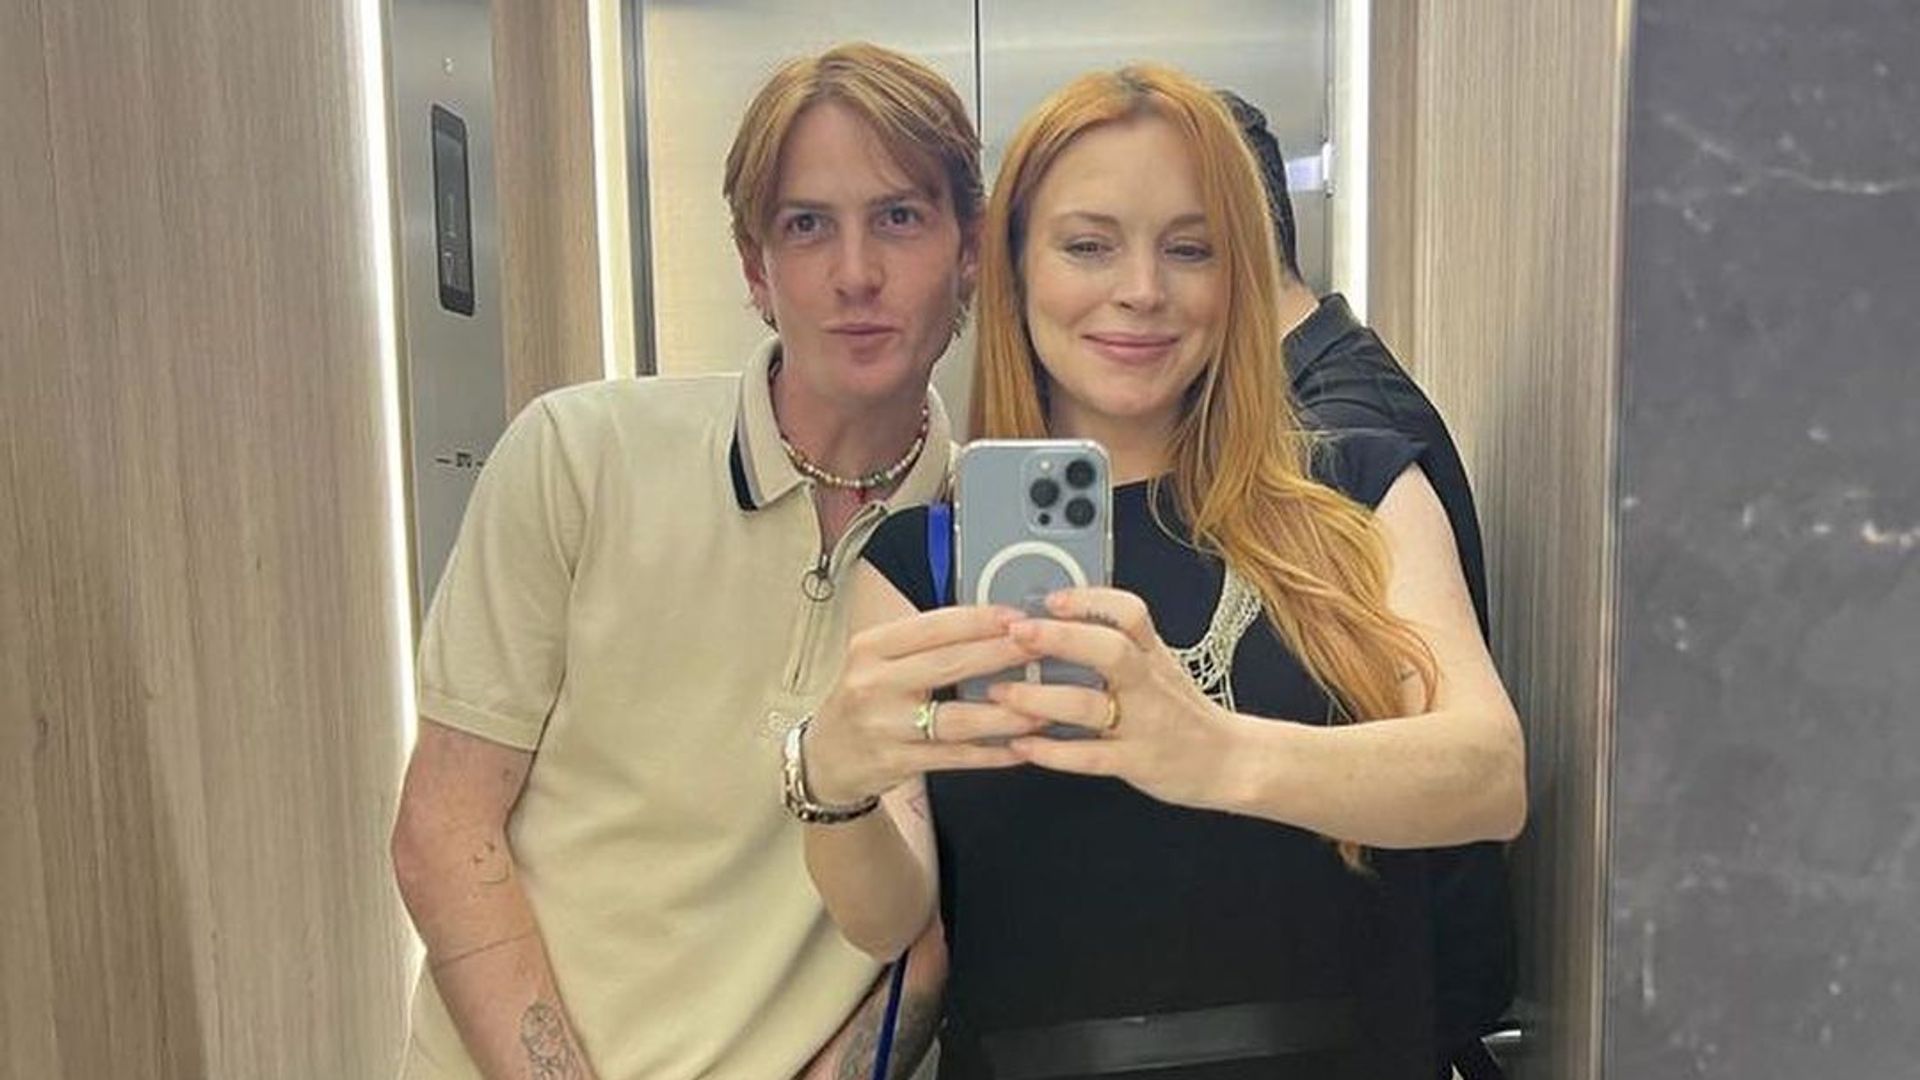 Lindsay with her brother